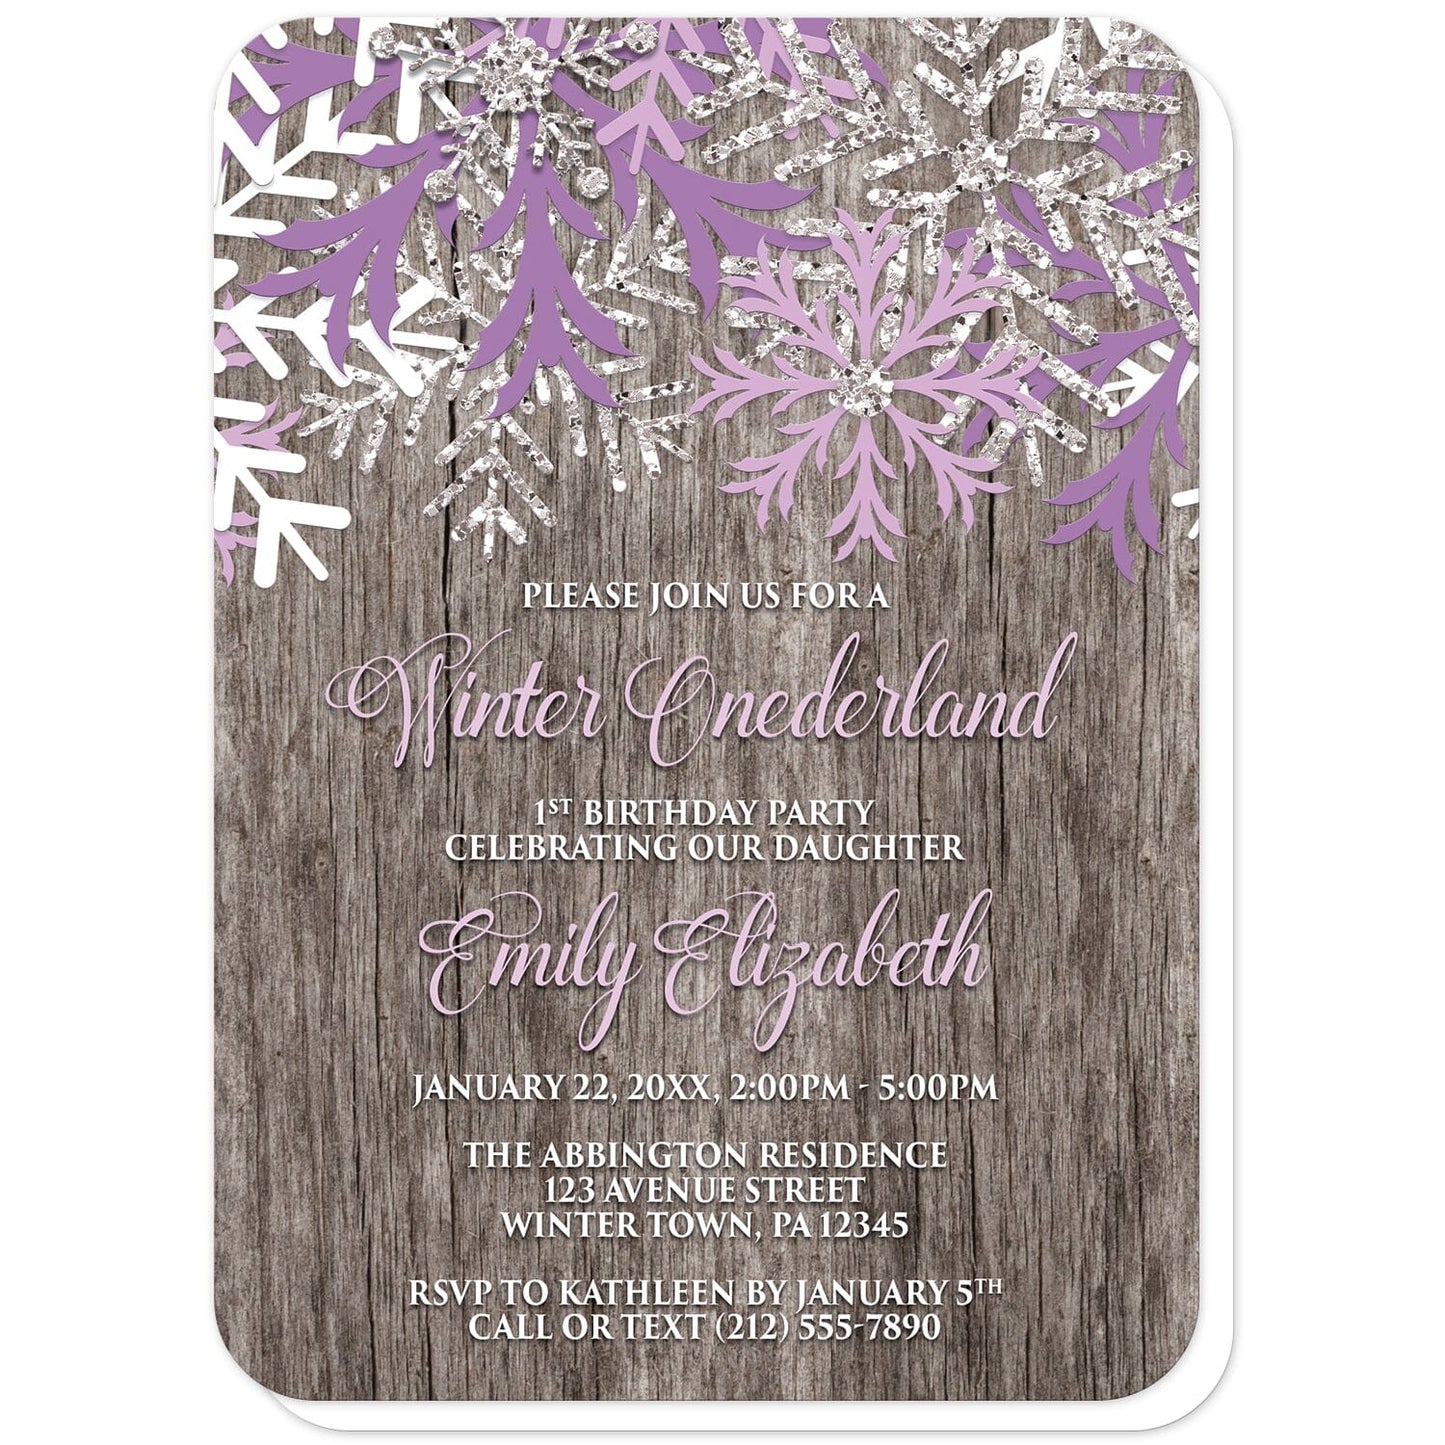 Rustic Wood Purple Snowflake Winter Onederland Invitations (with rounded corners) at Artistically Invited. Country-inspired rustic wood purple snowflake Winter Onederland invitations designed with purple, light purple, white, and silver-colored glitter-illustrated snowflakes along the top over a rustic wood illustration. Your personalized 1st Birthday party details are custom printed in light purple and white over the rustic wood background below the snowflakes. 